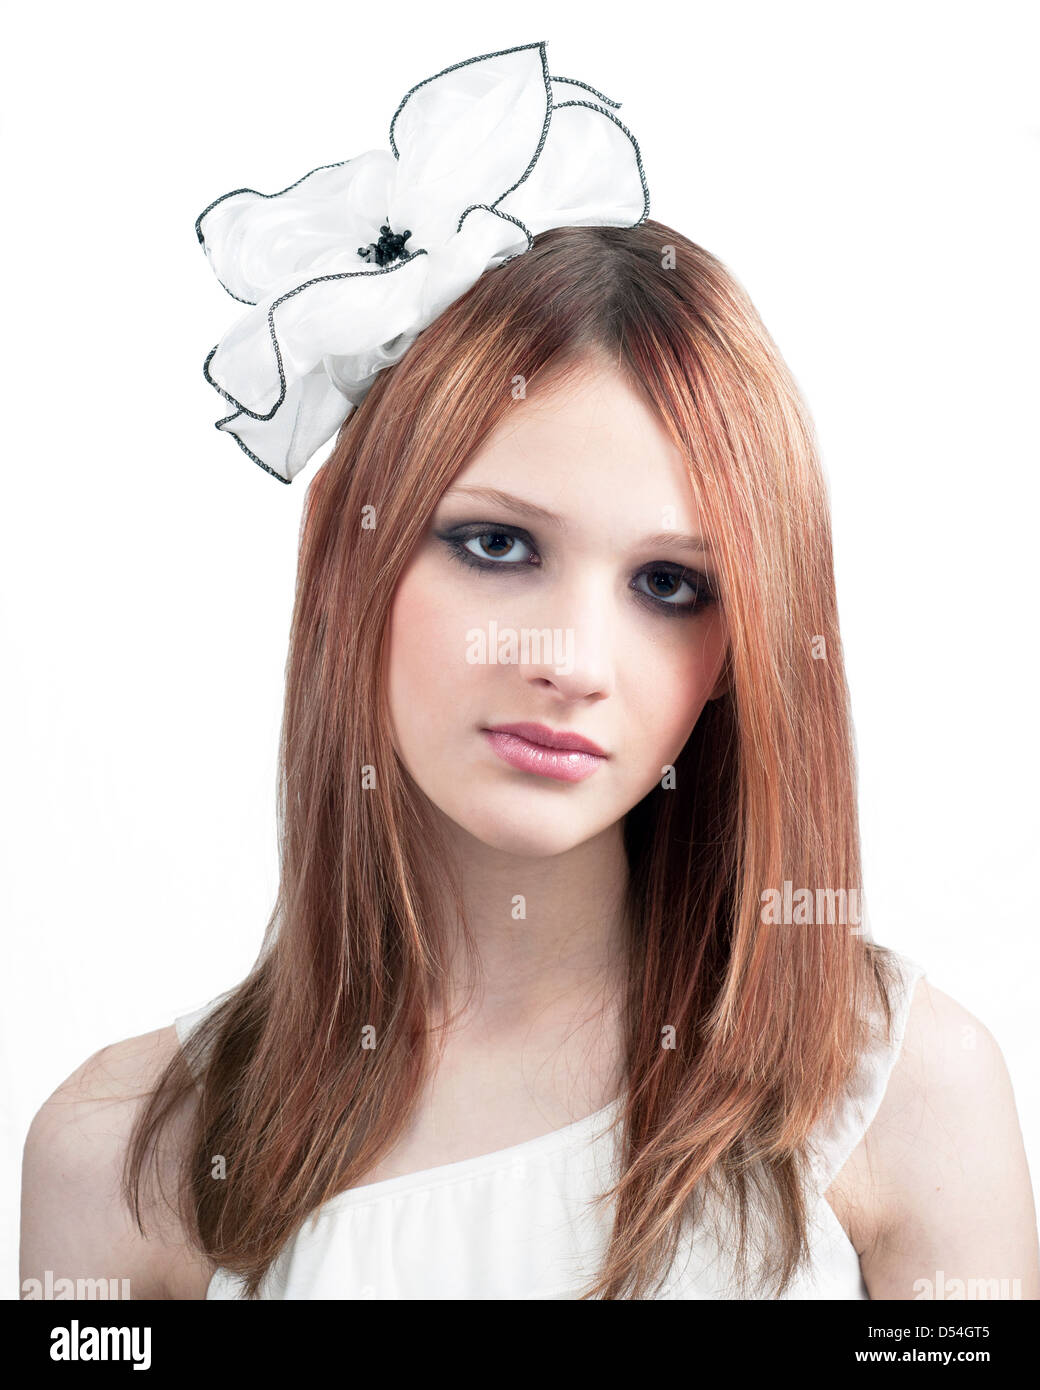 Portrait of pre-teen girl with white bow in hair against white background. Stock Photo